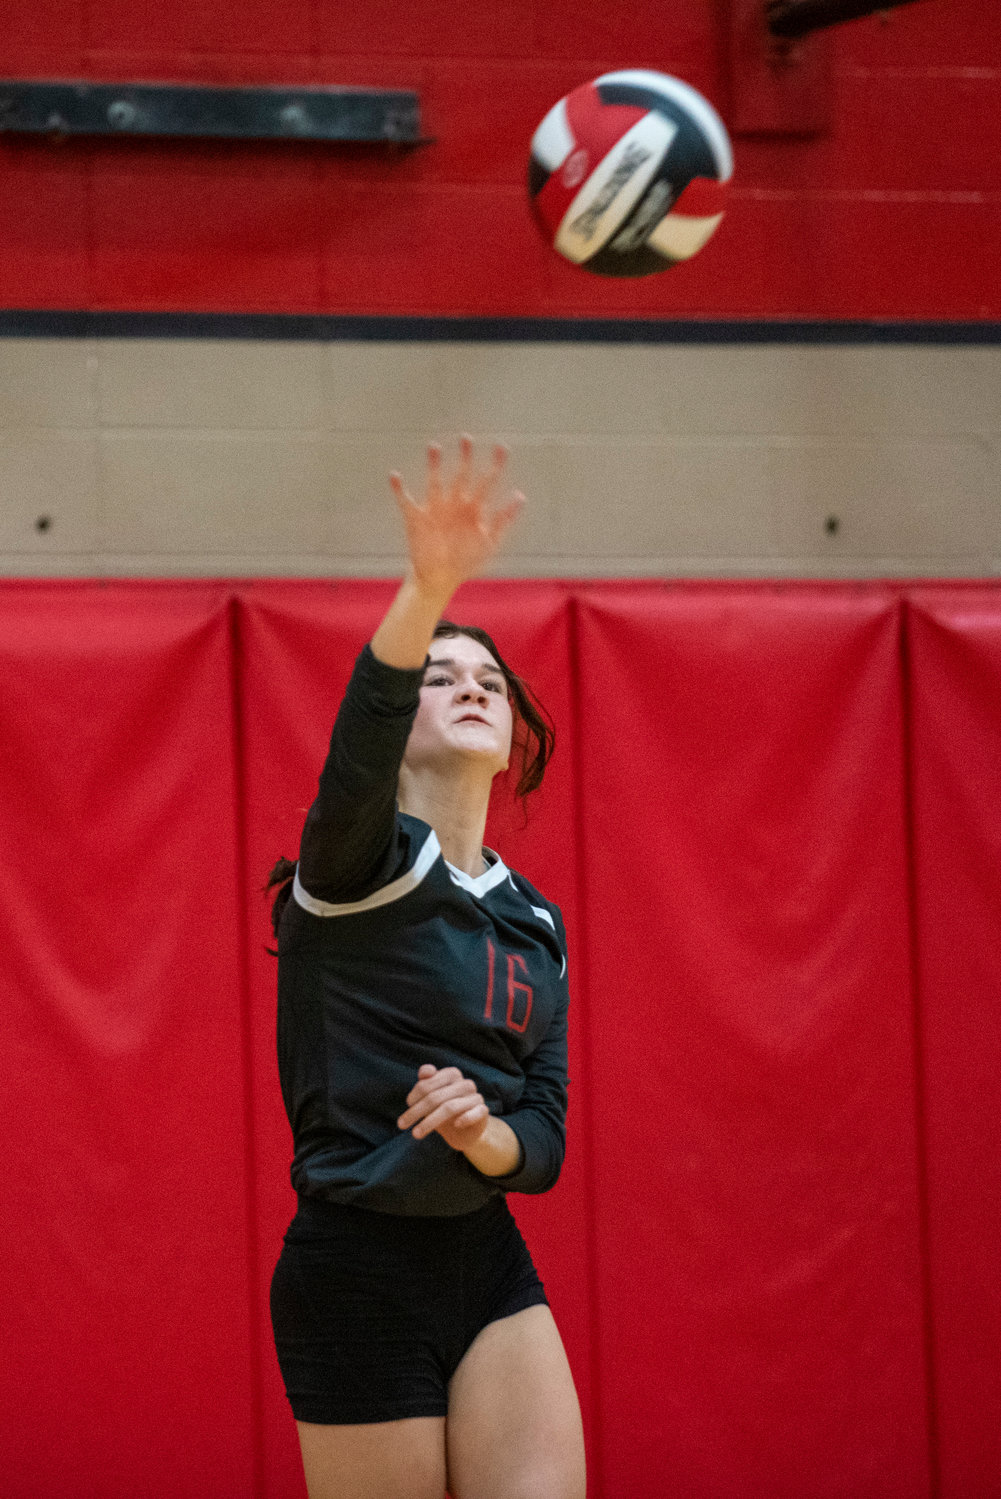 Tenino's Brooke Bratton (16) serves in the Beavers' second set against Aberdeen on Tuesday.